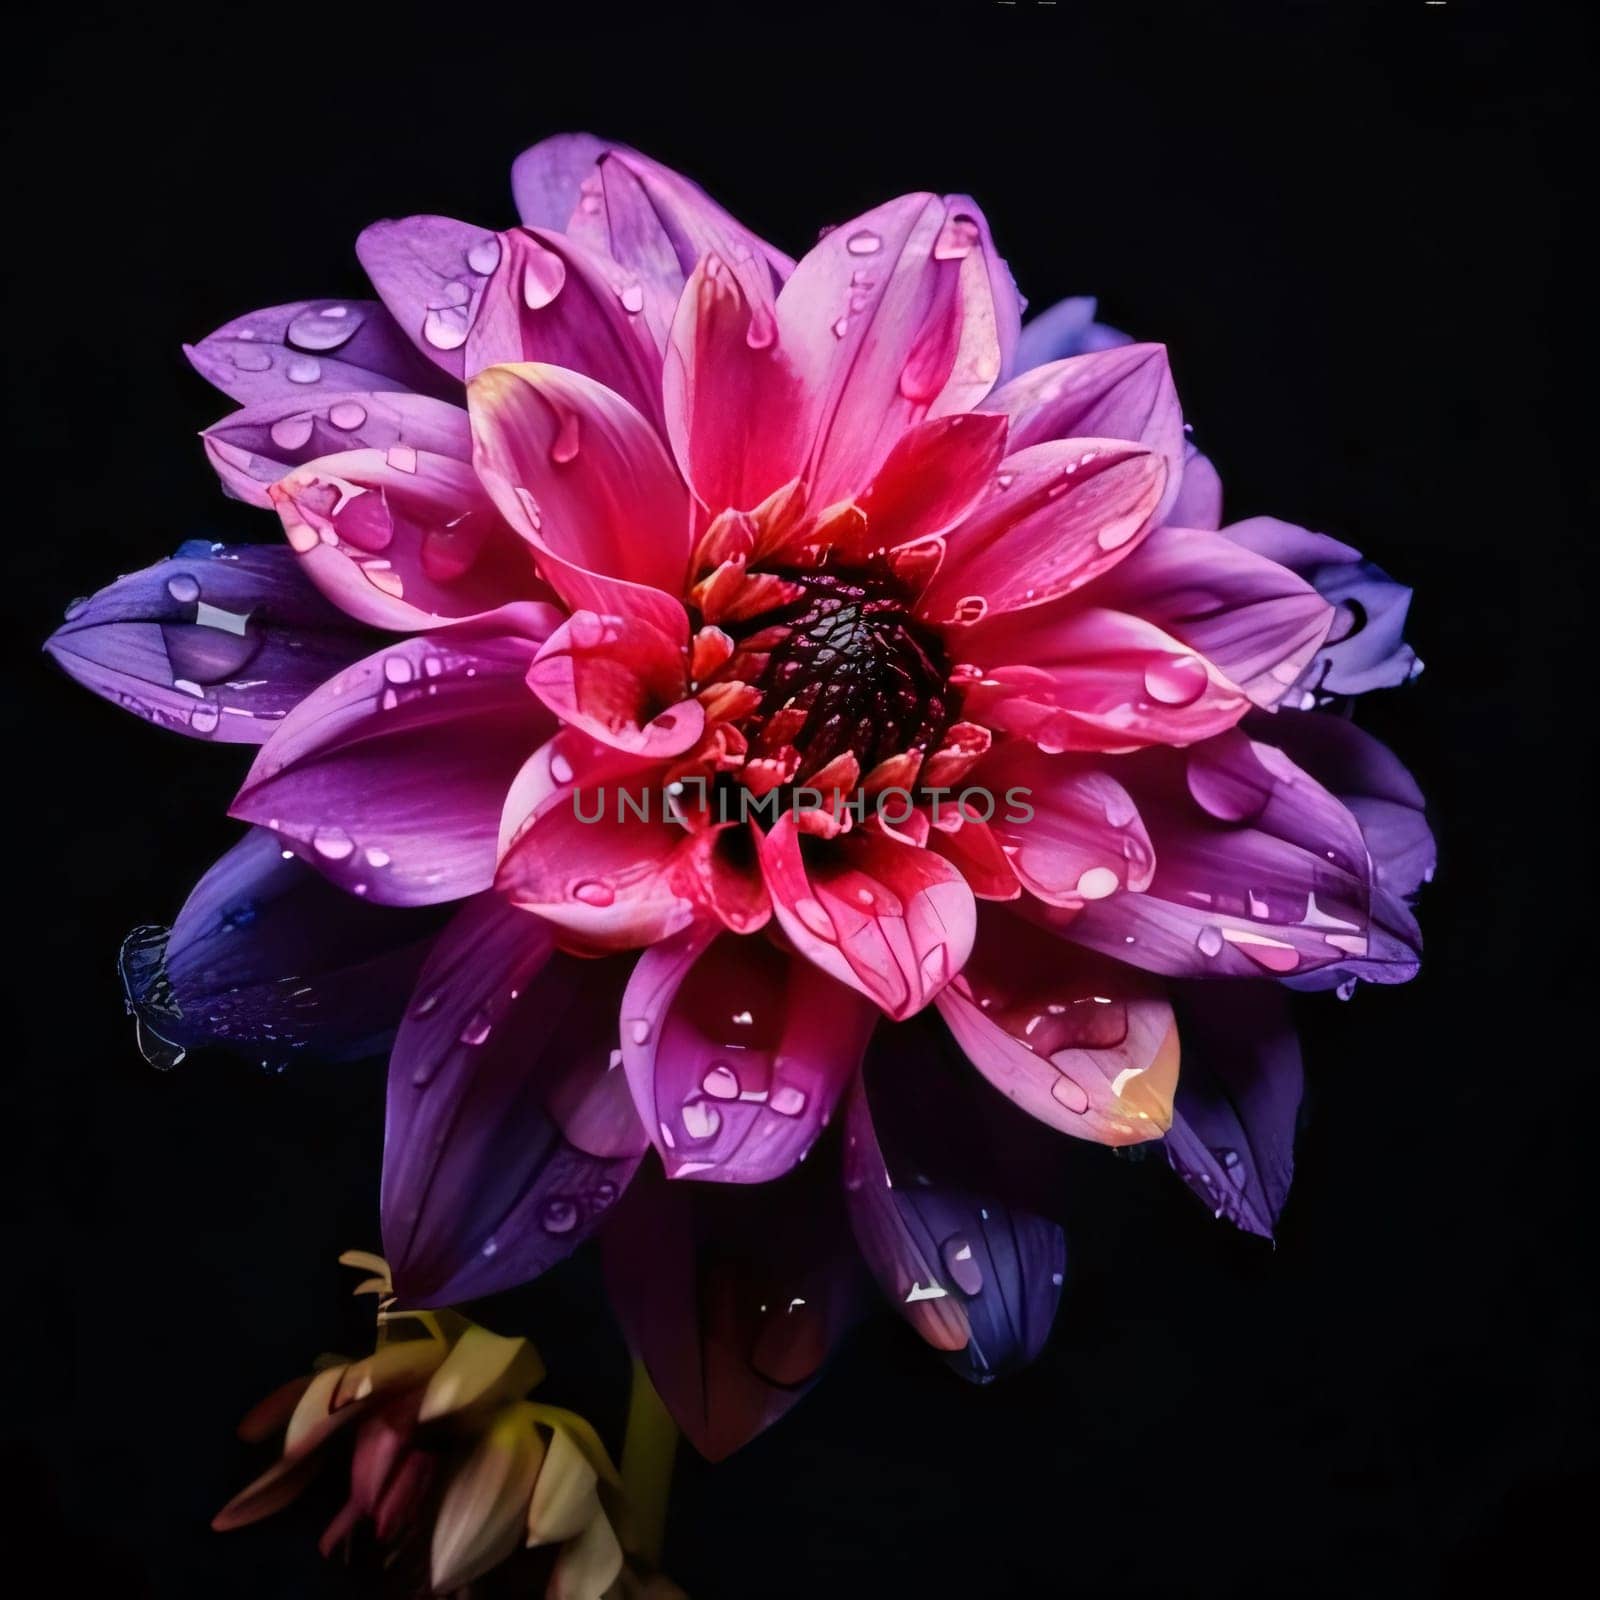 Pink flower with water drops isolated on black background. Flowering flowers, a symbol of spring, new life. A joyful time of nature waking up to life.